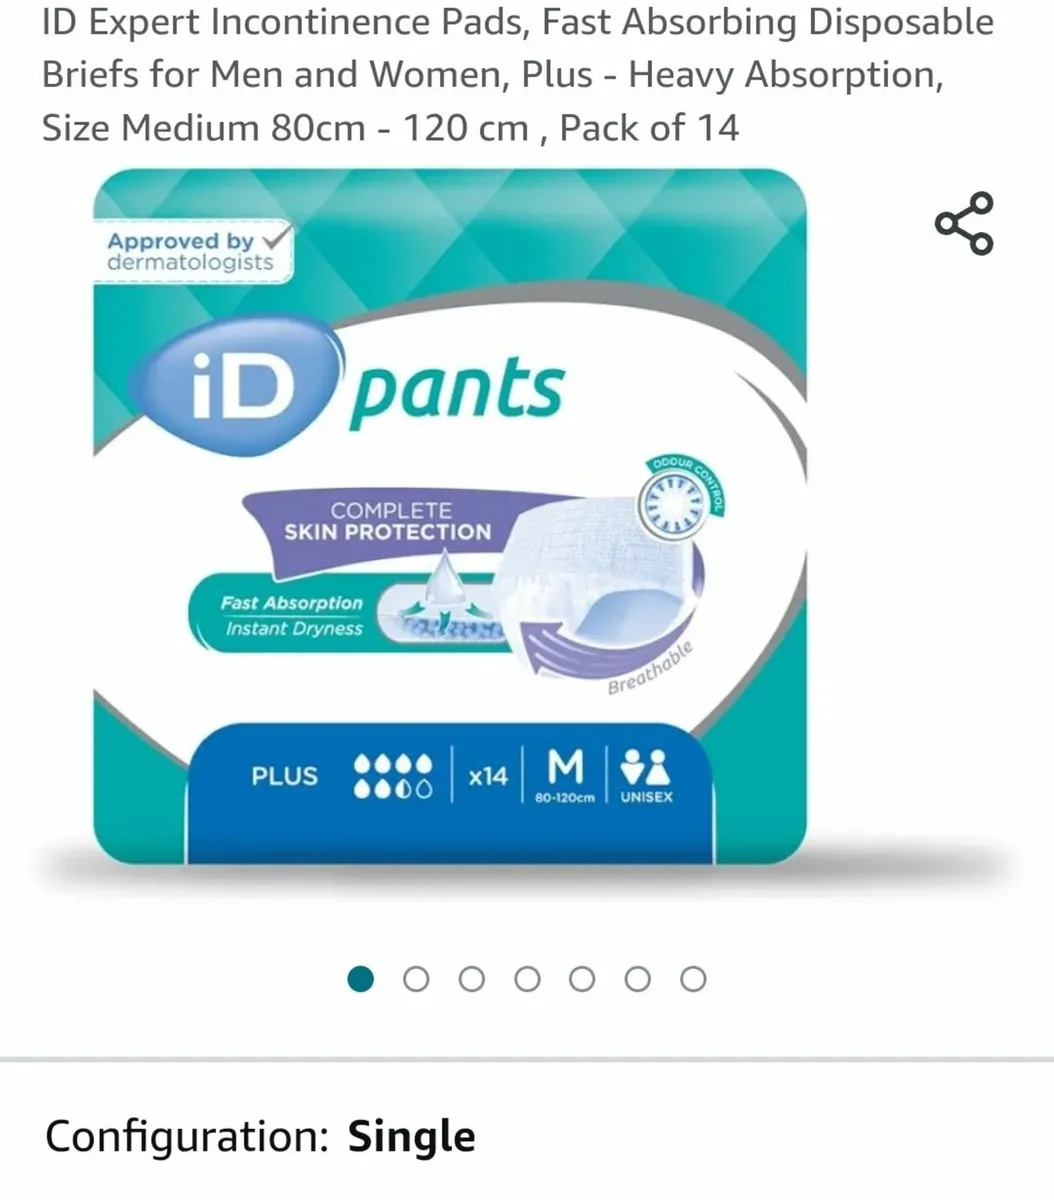 ID Expert Incontinence Pads, Fast Absorbing Dispos